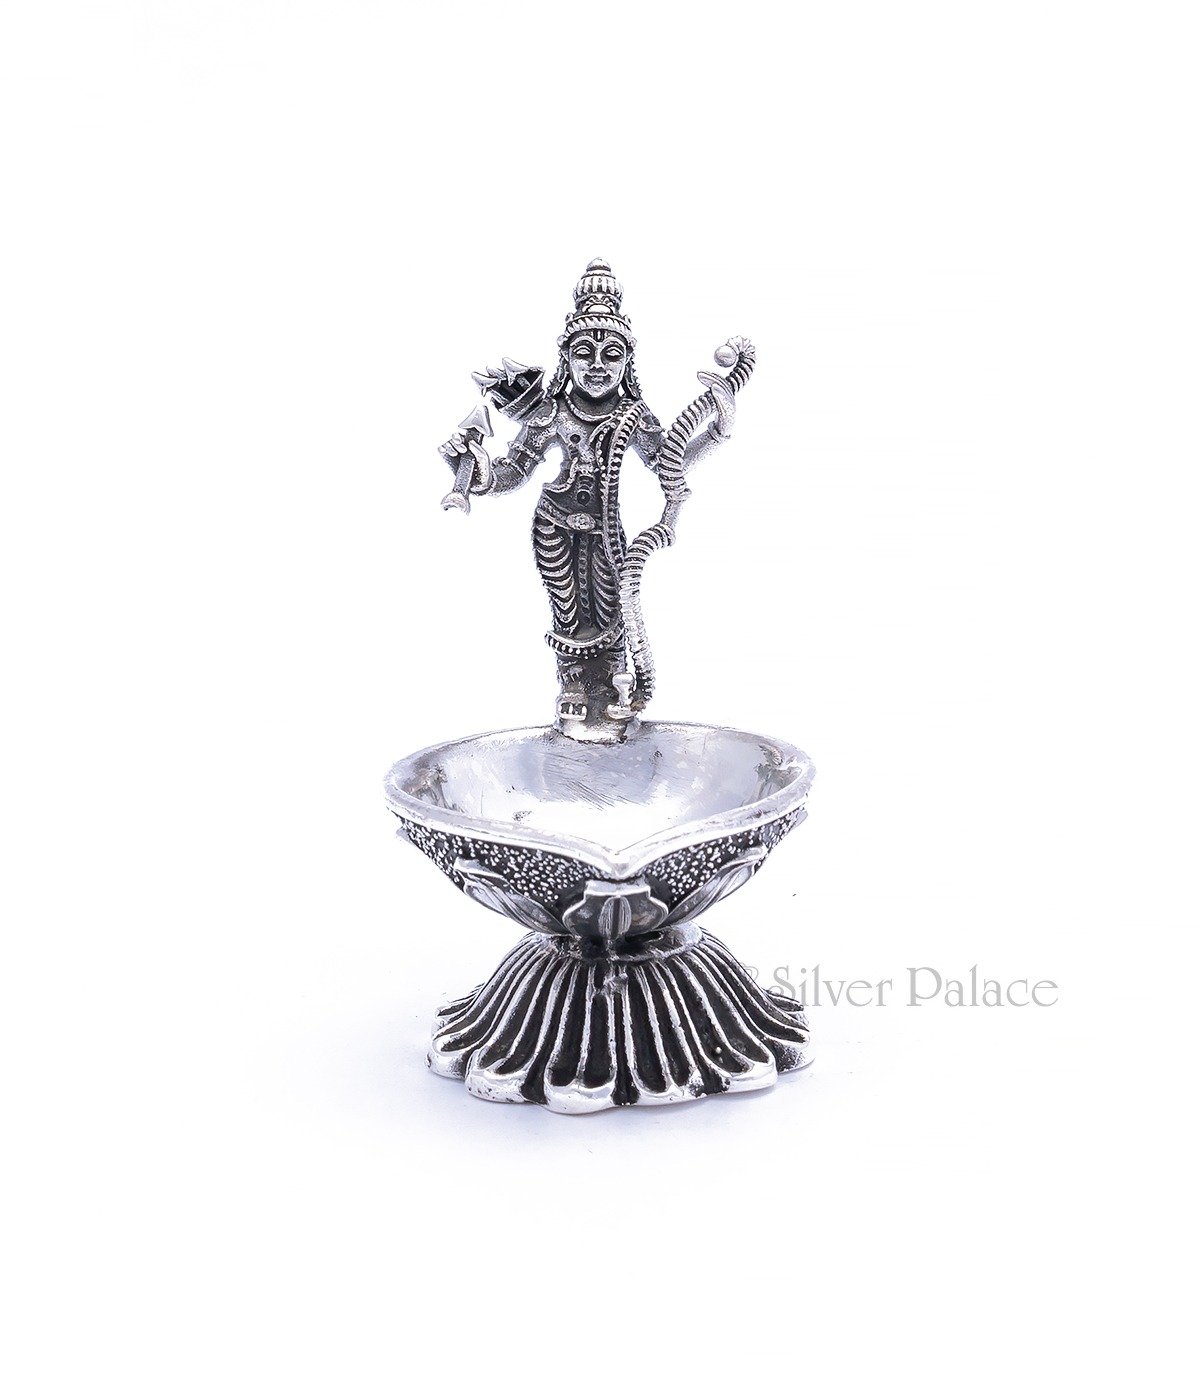 92.5 STERLING SILVER OXDISED DASAVATHAARAM RAMA STATUE LAMP